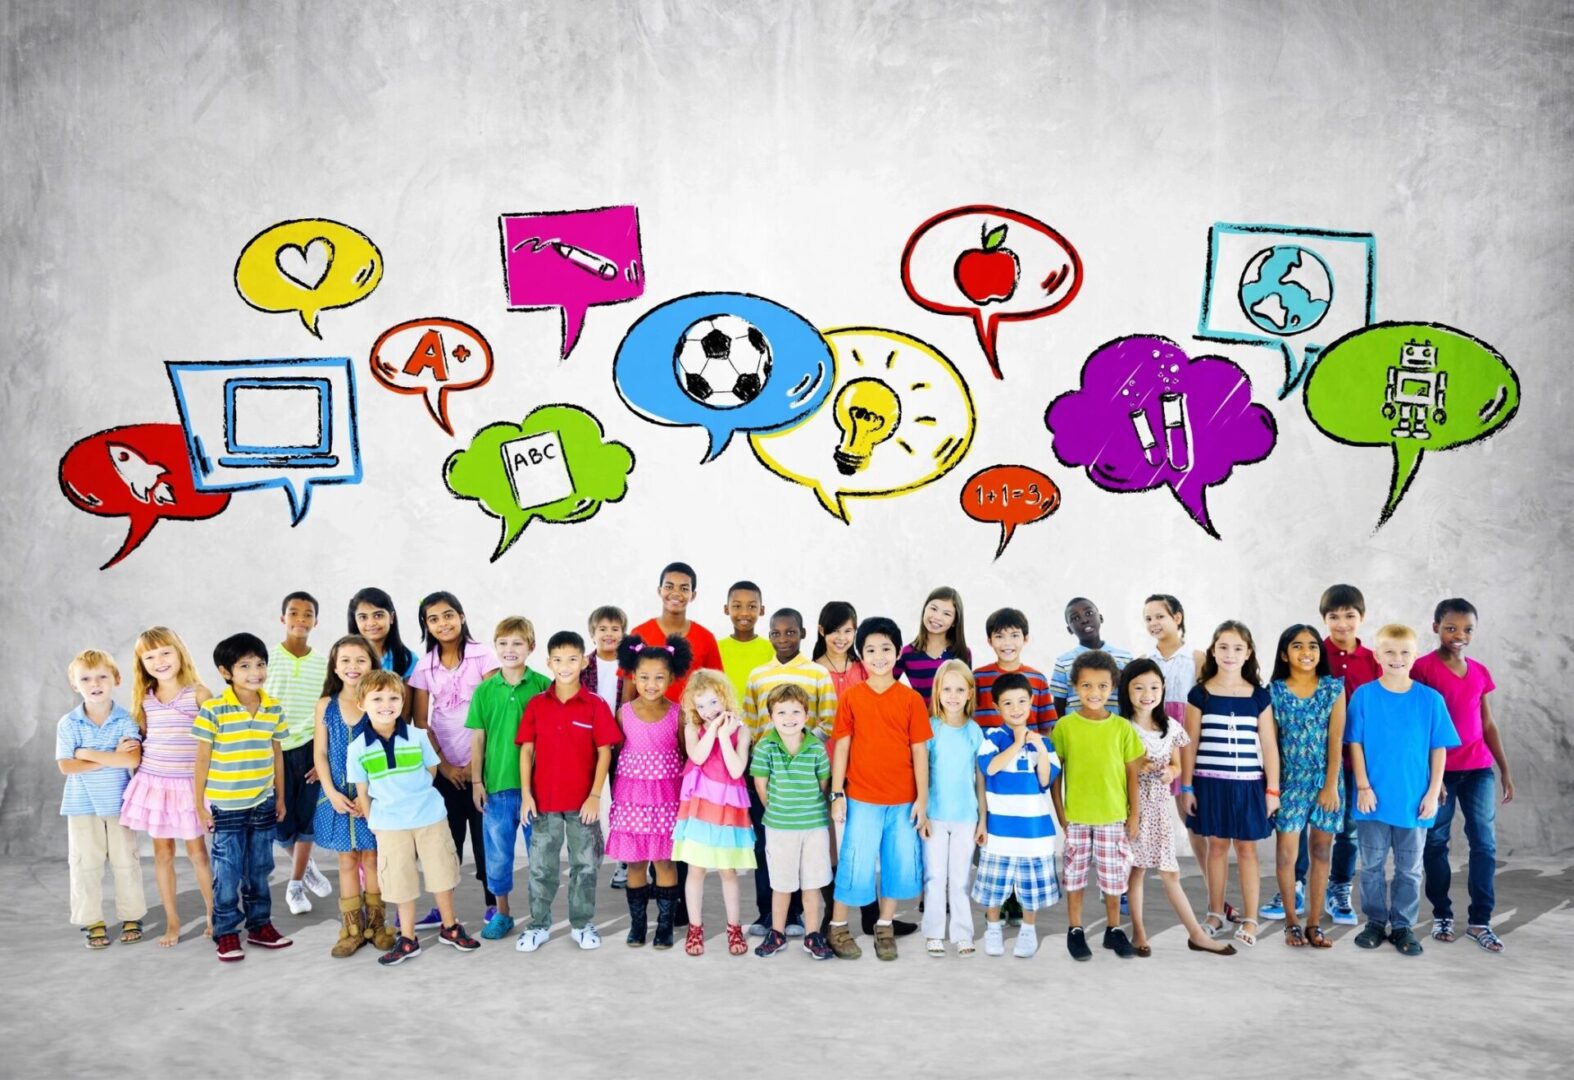 Children standing in front of a wall with illustrated thought bubbles